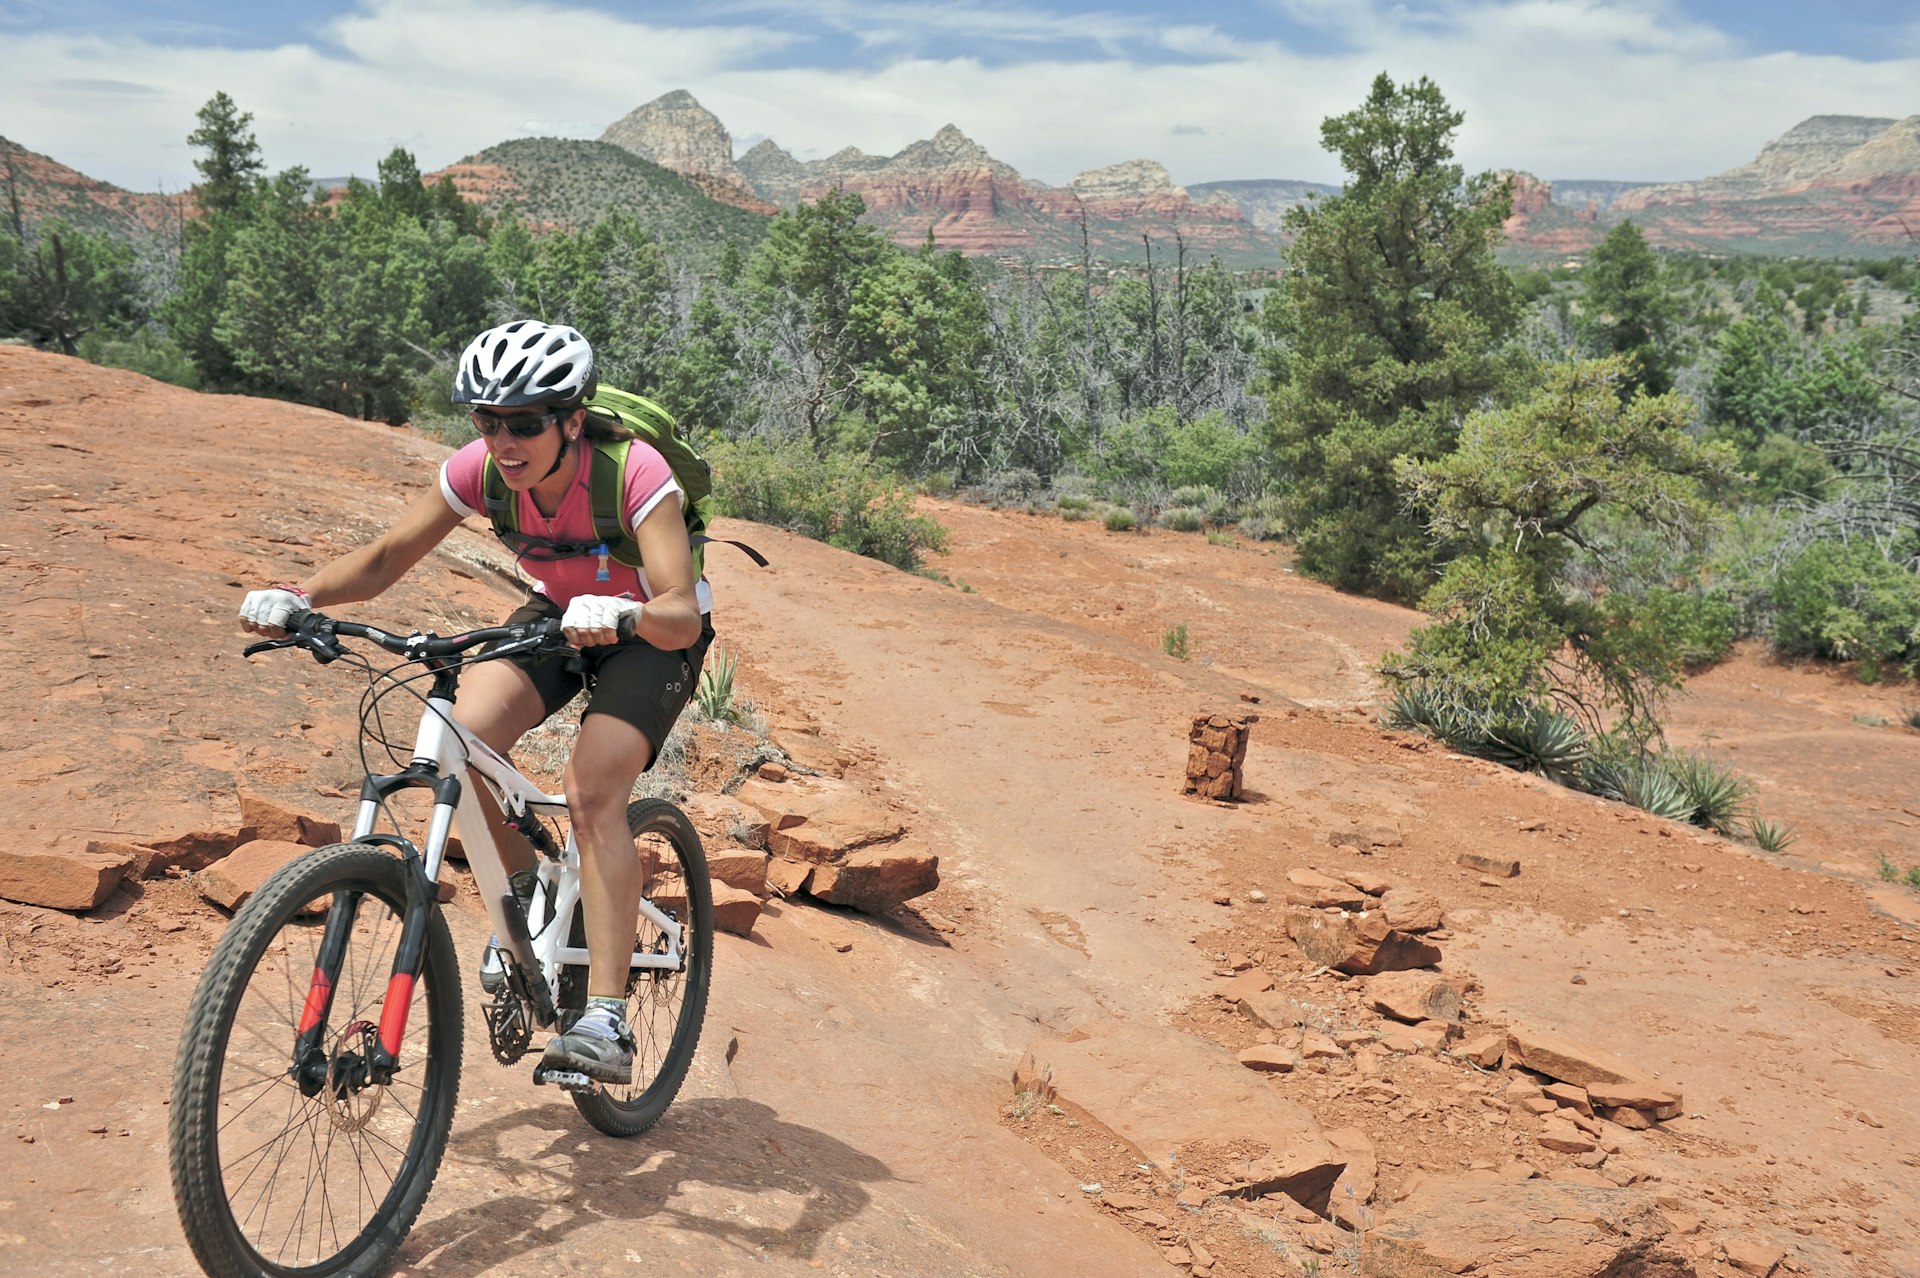 A woman rides a mountain bike on a red stony track with desert landscape stretching out behind her